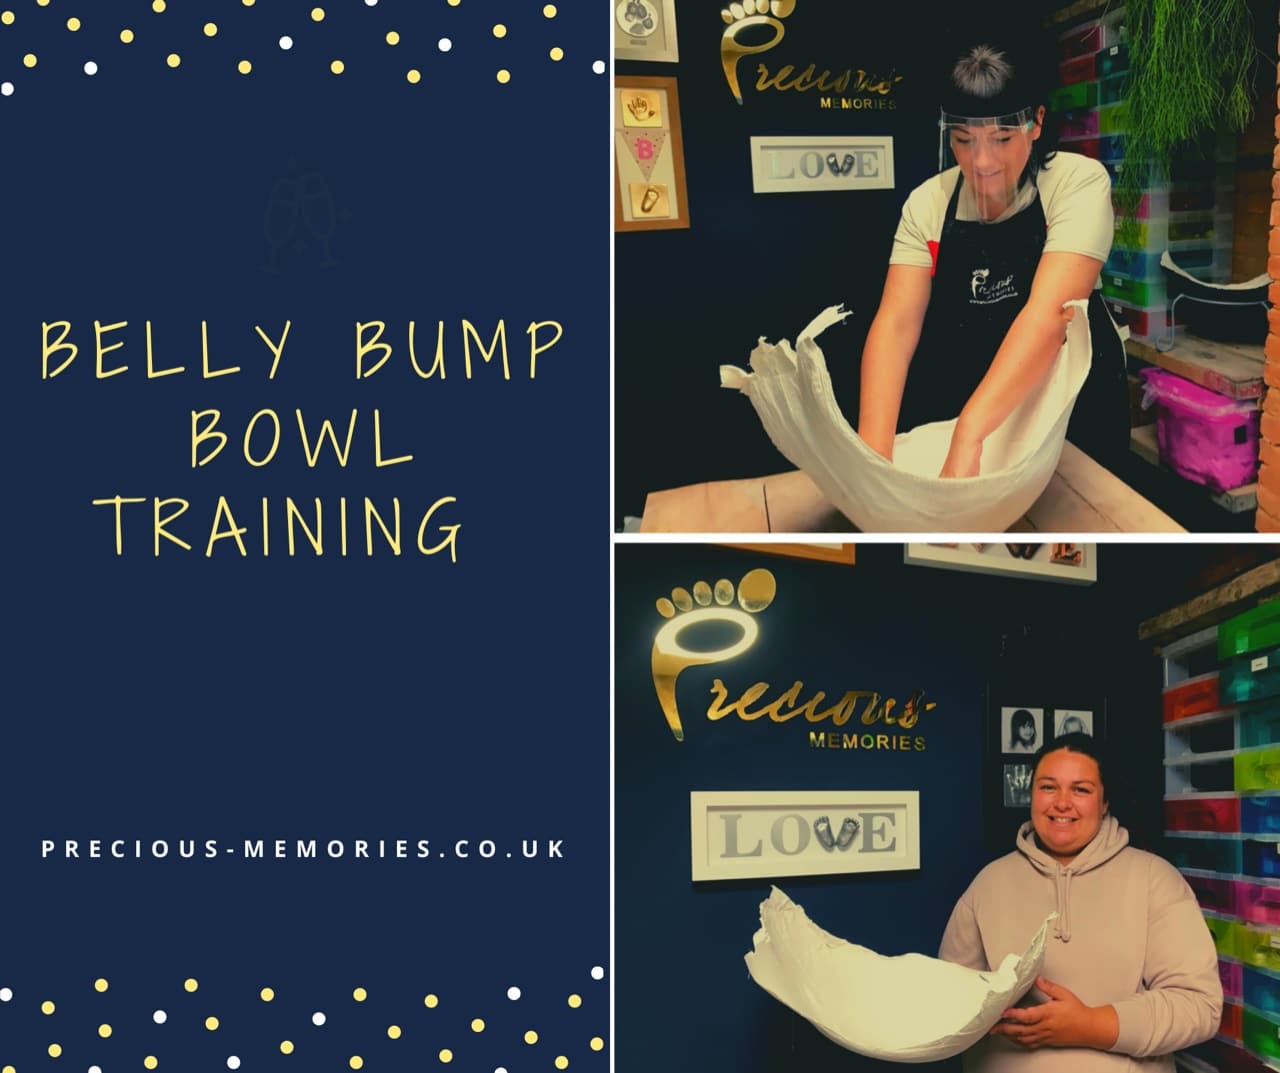 10 reasons to attend this belly bump training course in Poole, Dorset